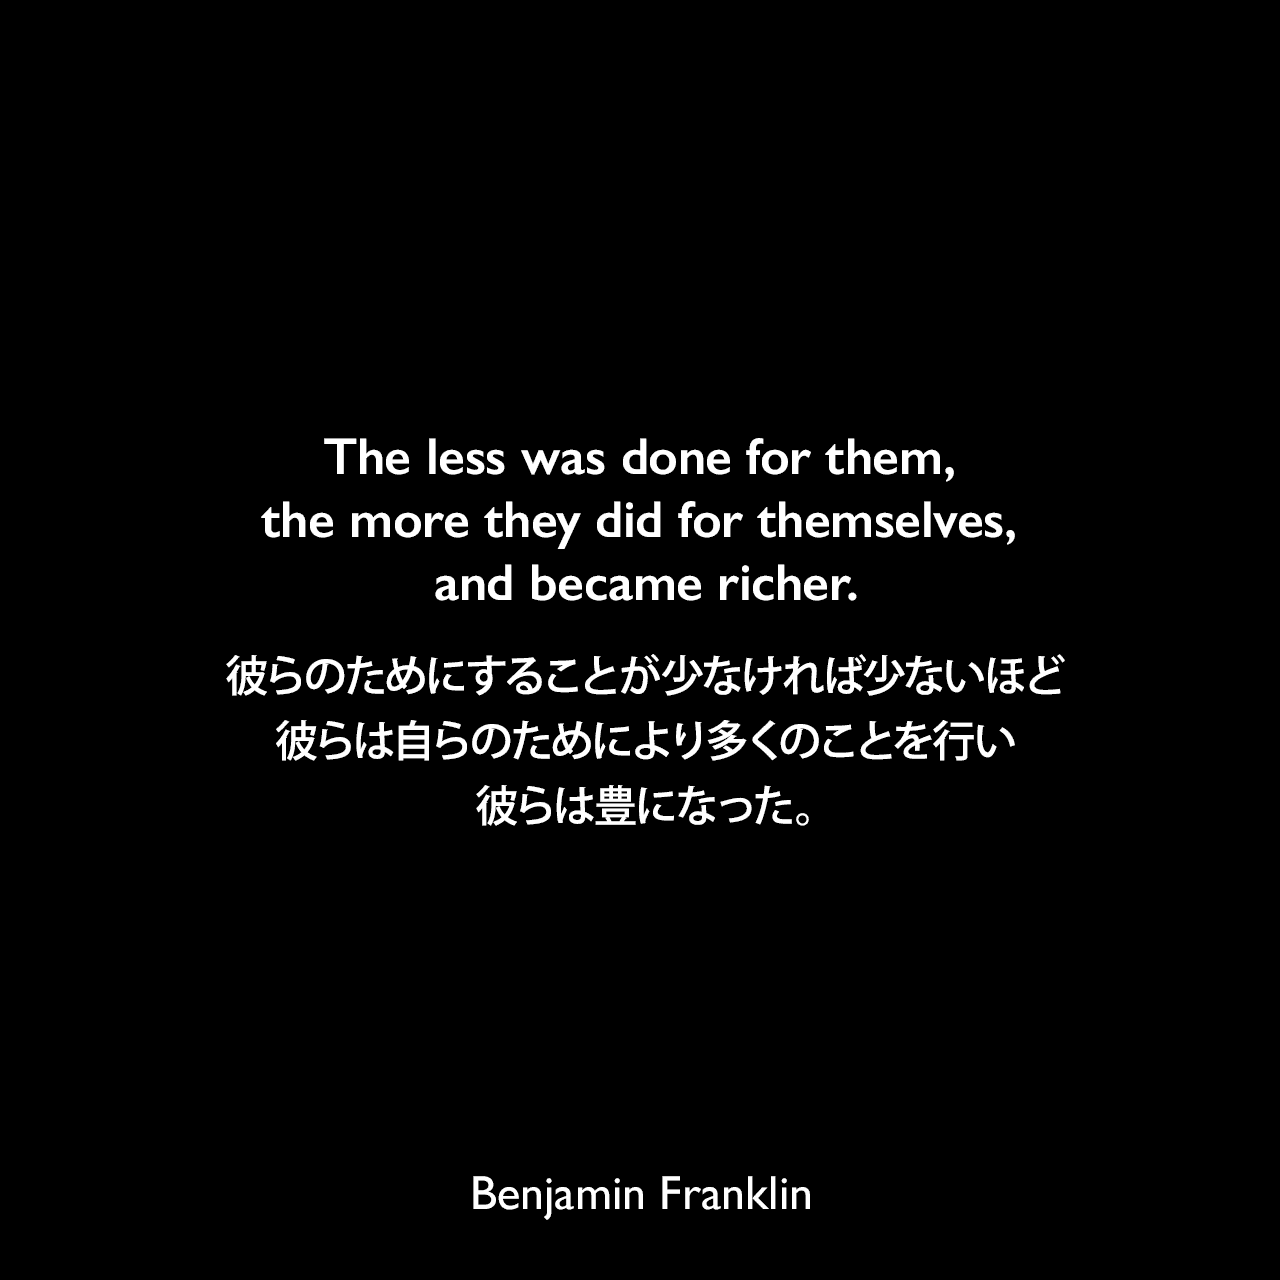 The less was done for them, the more they did for themselves, and became richer.彼らのためにすることが少なければ少ないほど、彼らは自らのためにより多くのことを行い、彼らは豊になった。- 「On the Price of Corn, and Management of the Poor（1766年）」よりBenjamin Franklin